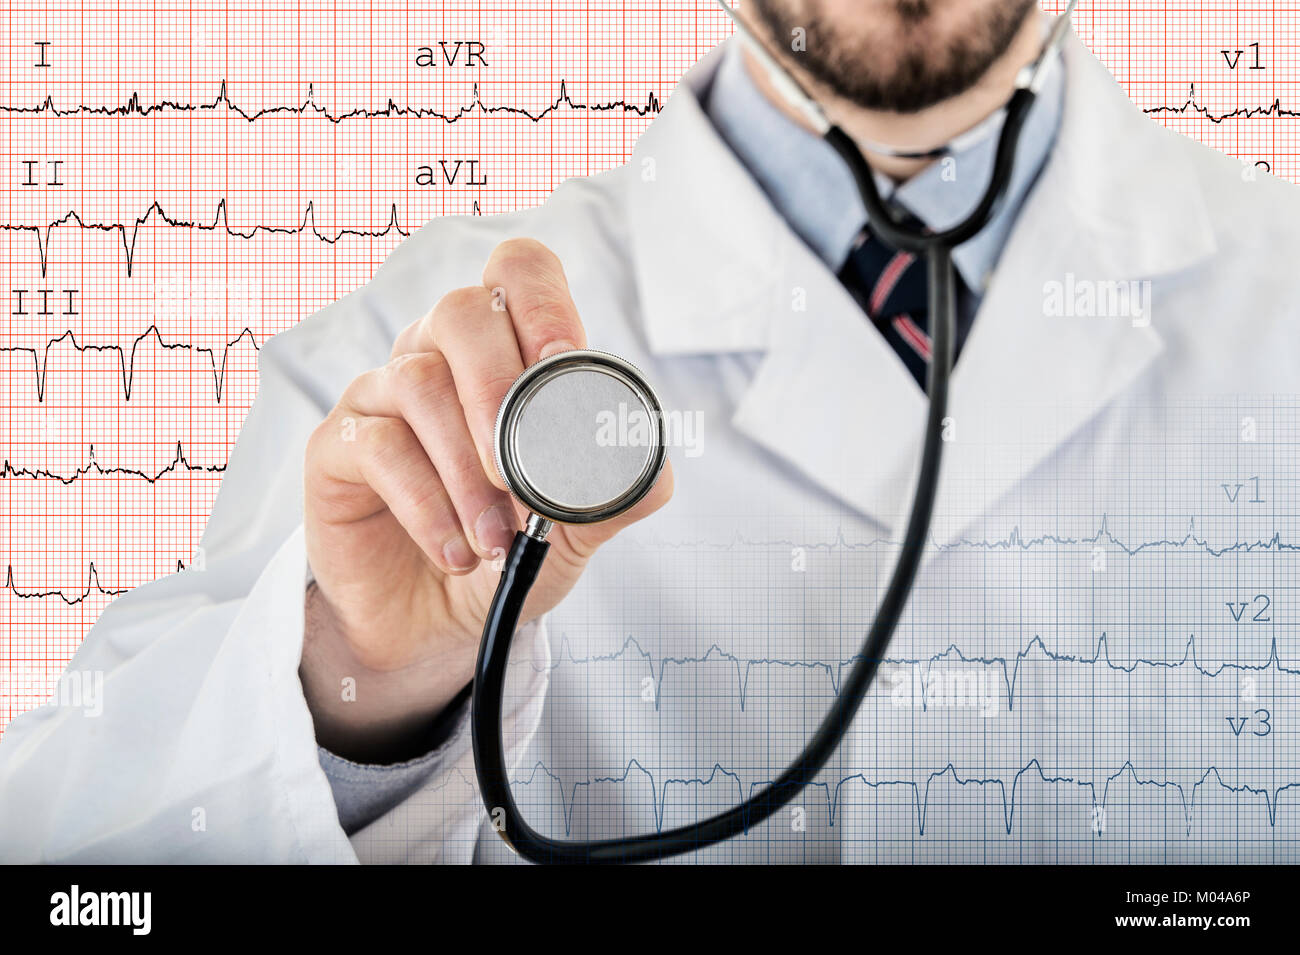 Male cardiologist doctor showing stethoscope for checkup with electrocardiogram in background Stock Photo